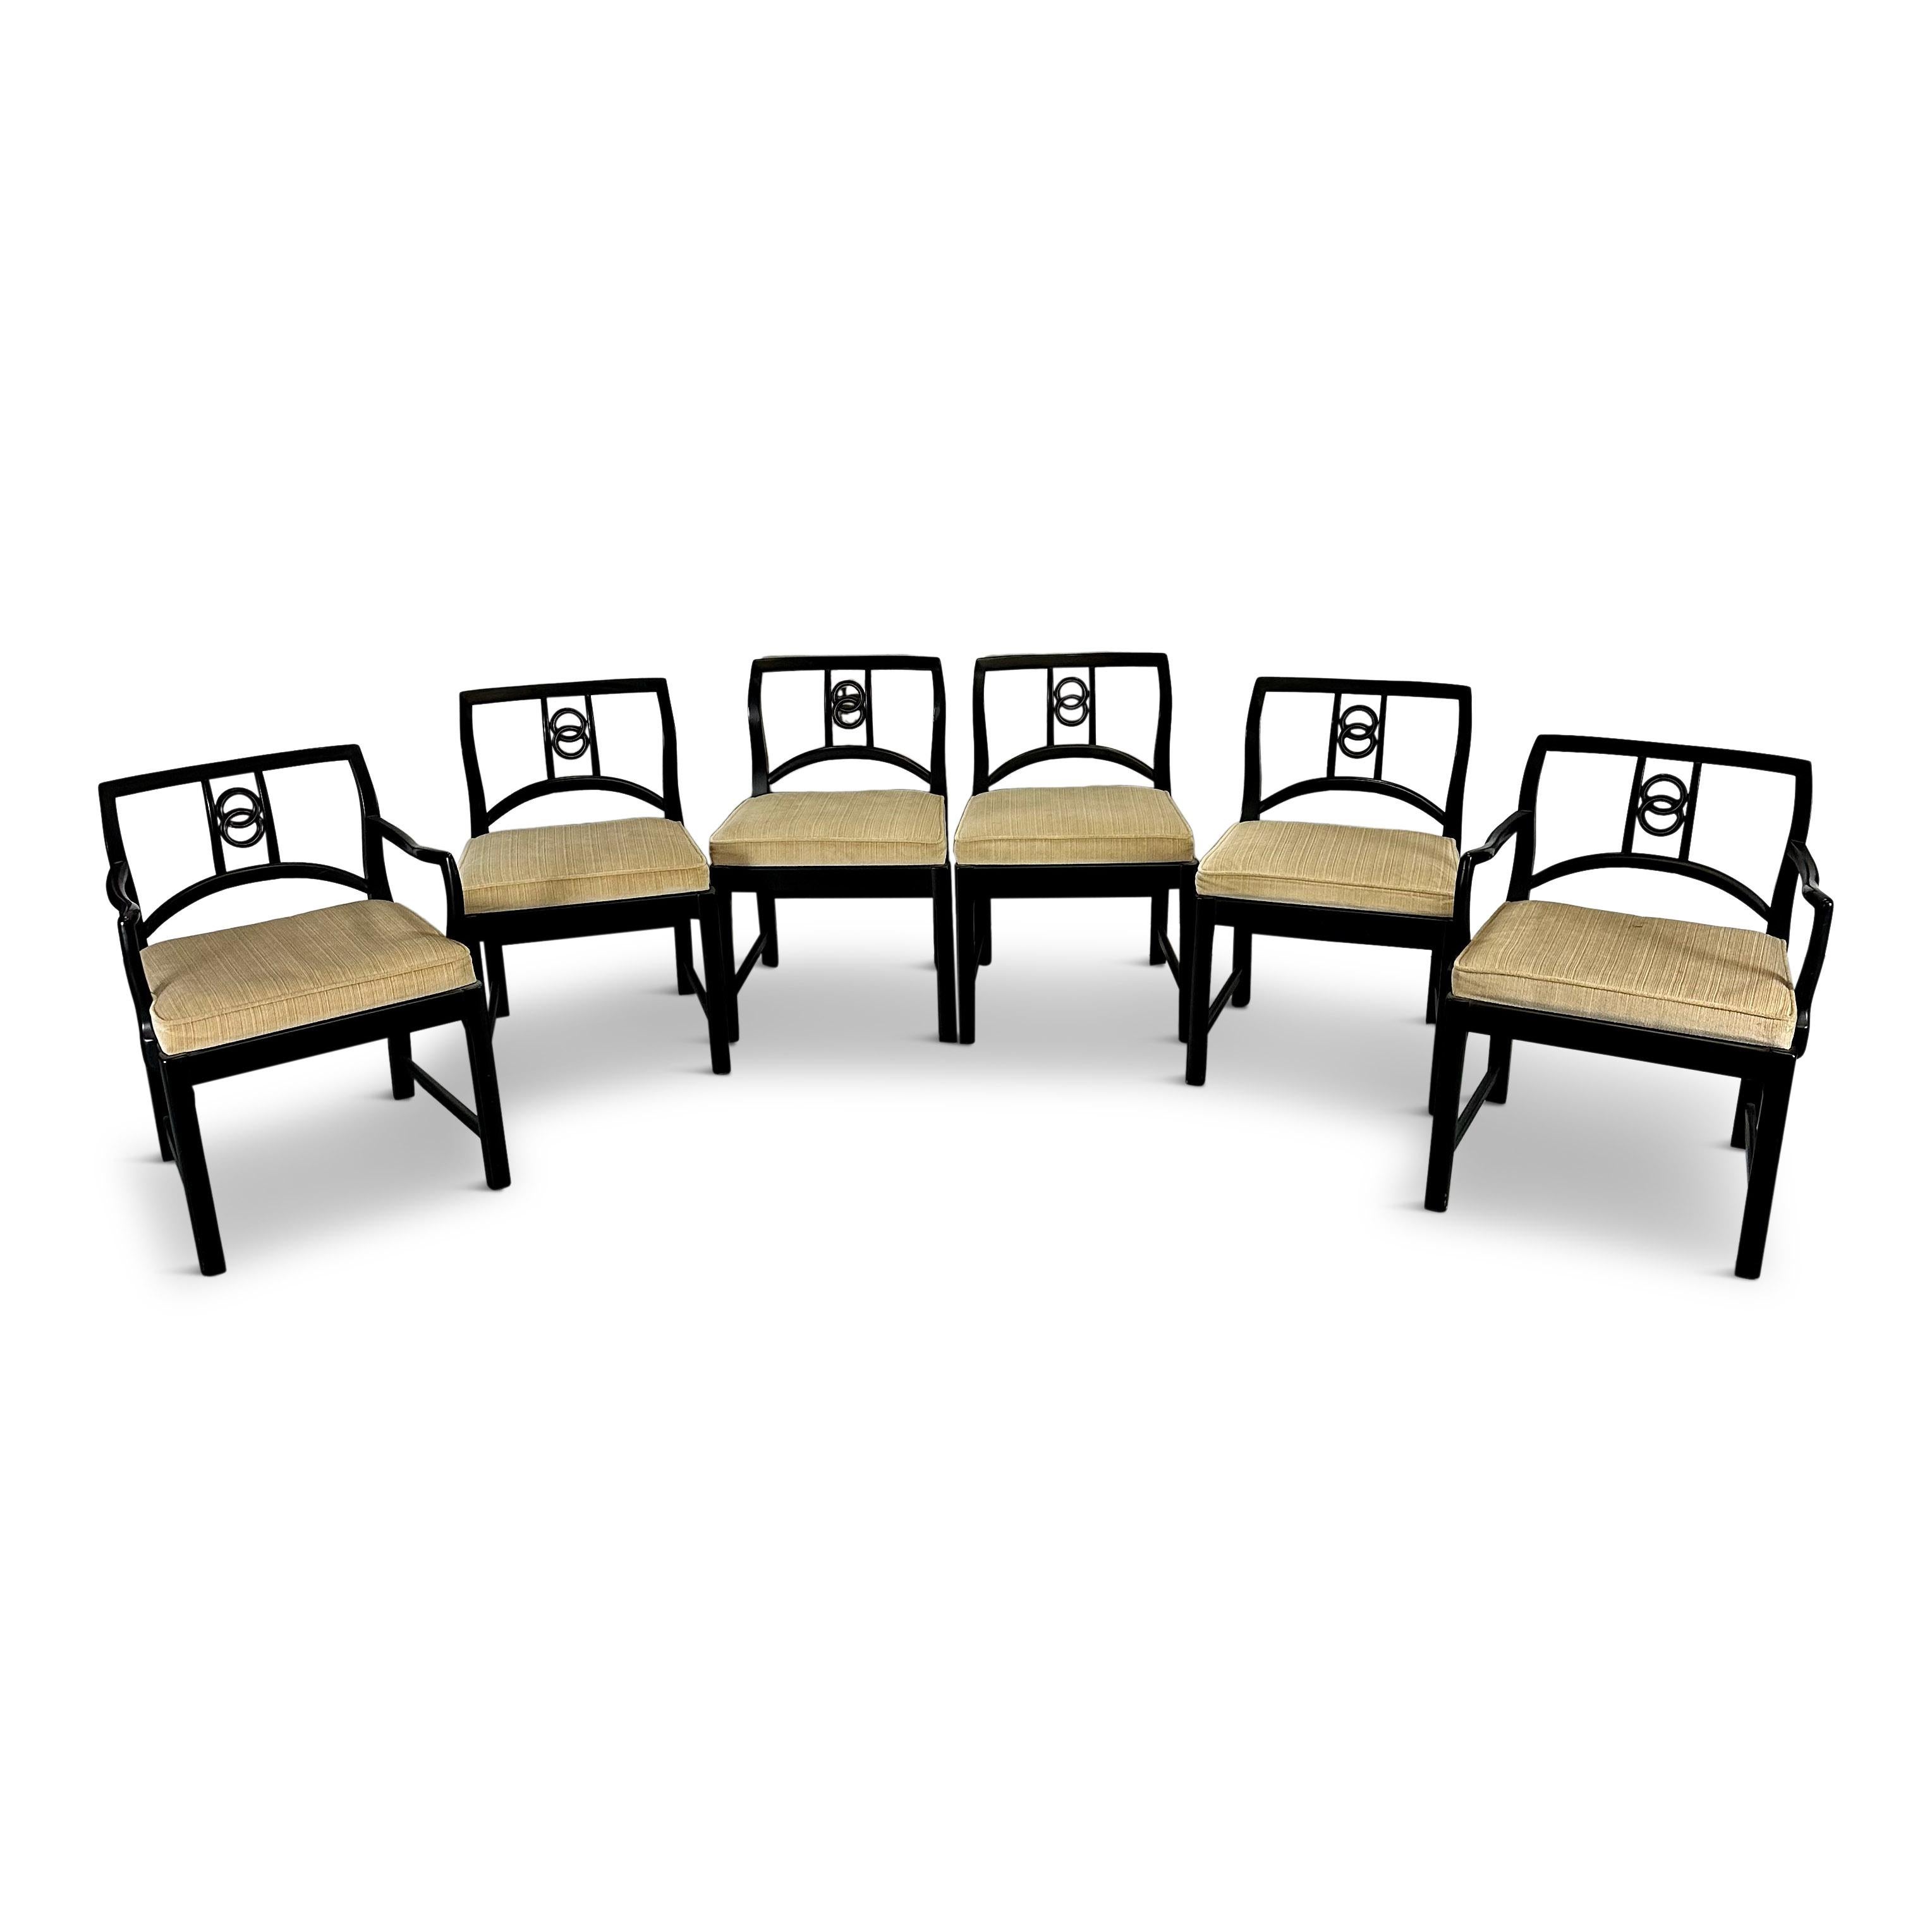 Sophisticated and elegant set of mid-century modern sculptural dining chairs designed by the American design legend Michael Taylor for Baker Furniture, circa 1960s. The set includes 4 arm and 12 side chairs. This particular series is one of the most